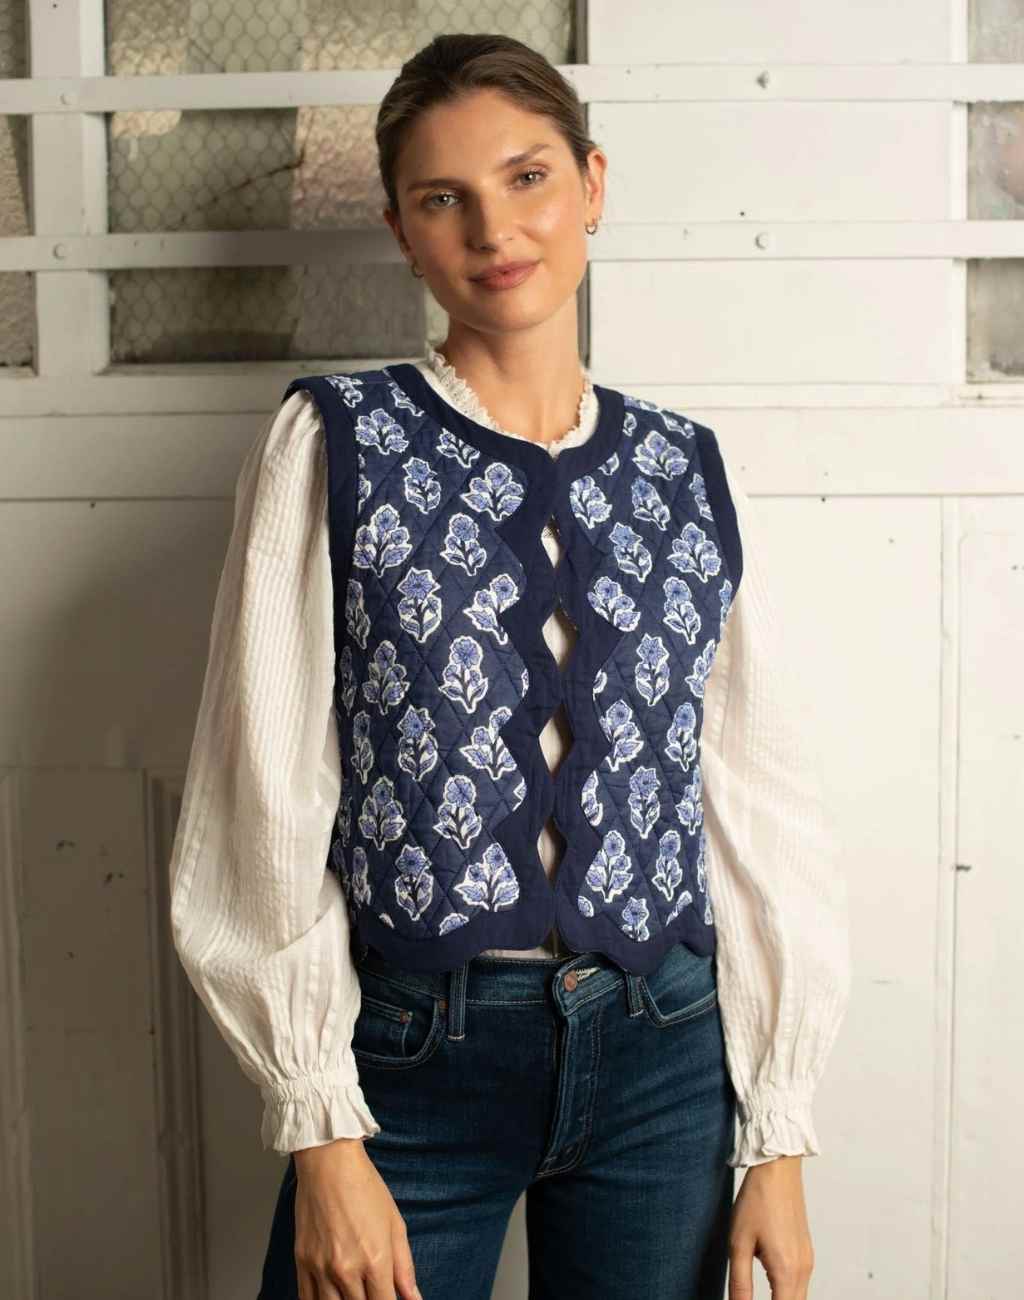 Blockprint Celest Vest in Navy Floral with Precious Scalloped Border - Visit Nifty Ophelia & Indigo 